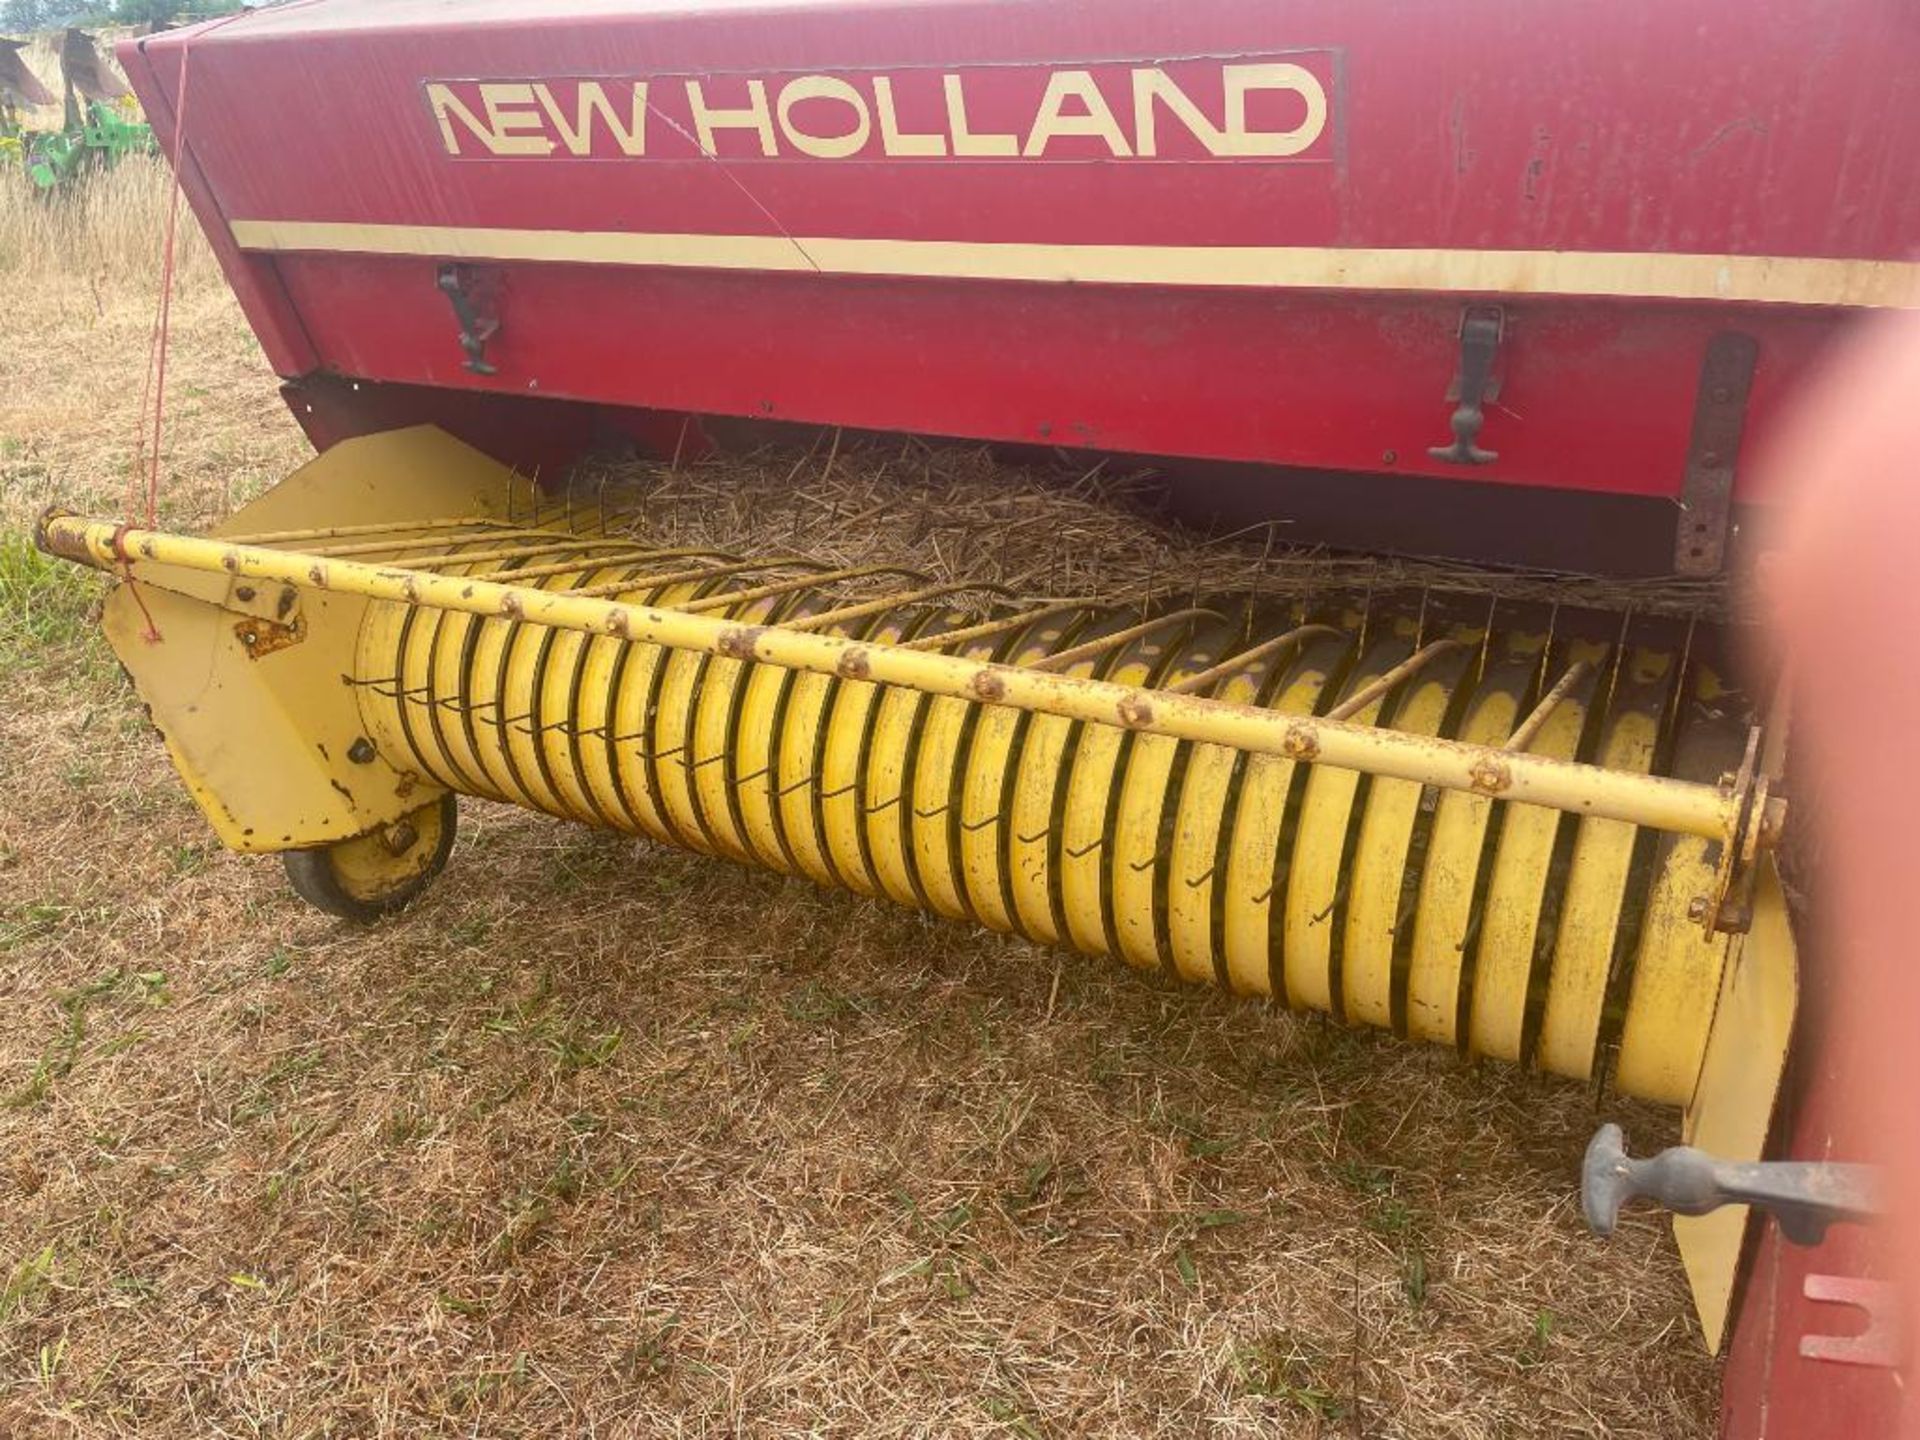 New Holland 378 Hayliner, conventional baler, 6' bed. Serial No: B378Z1035 - Image 8 of 9